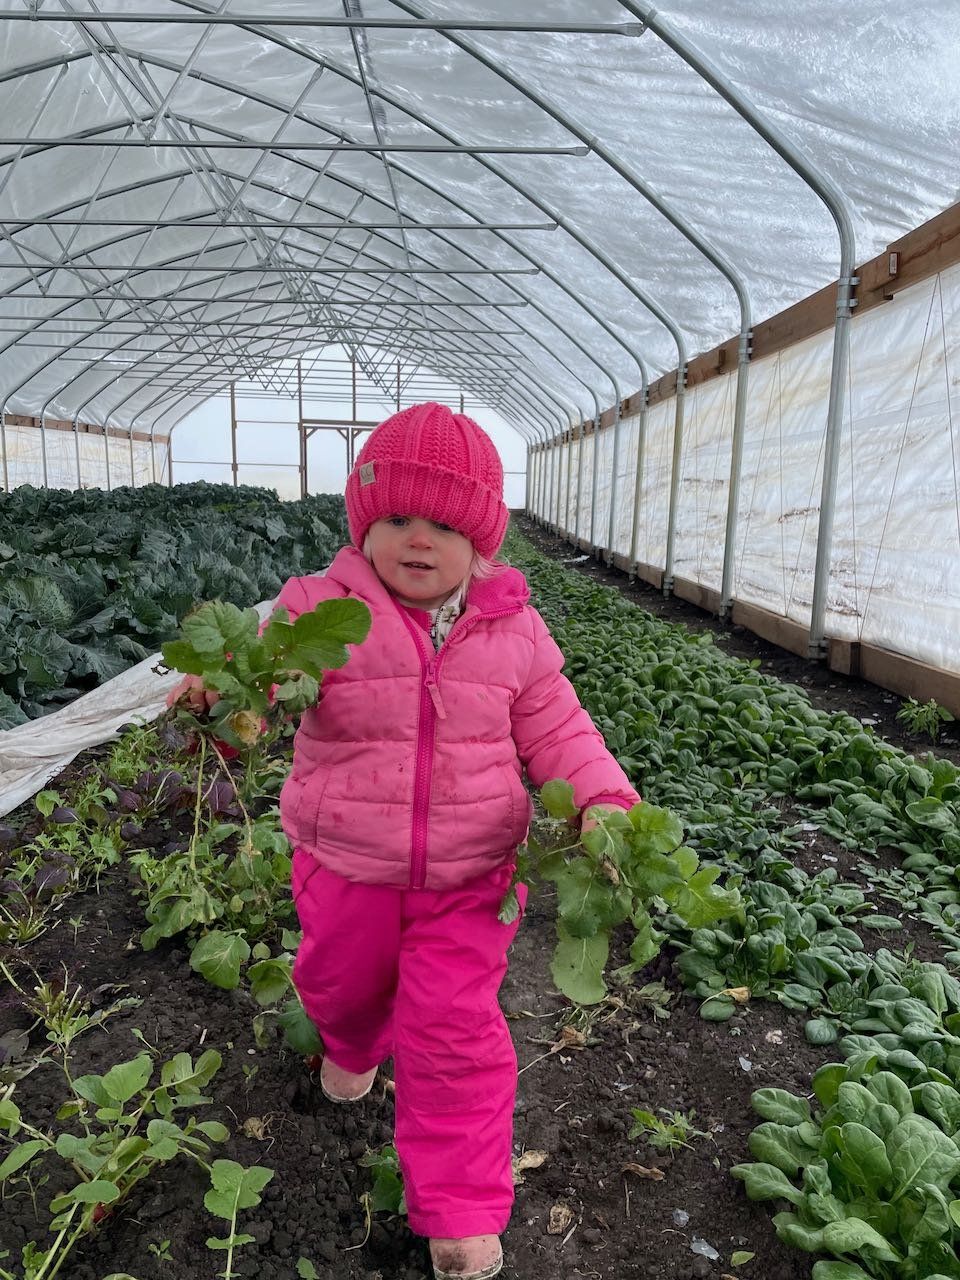 Next Happening: Keeping On In the Winter Tunnel